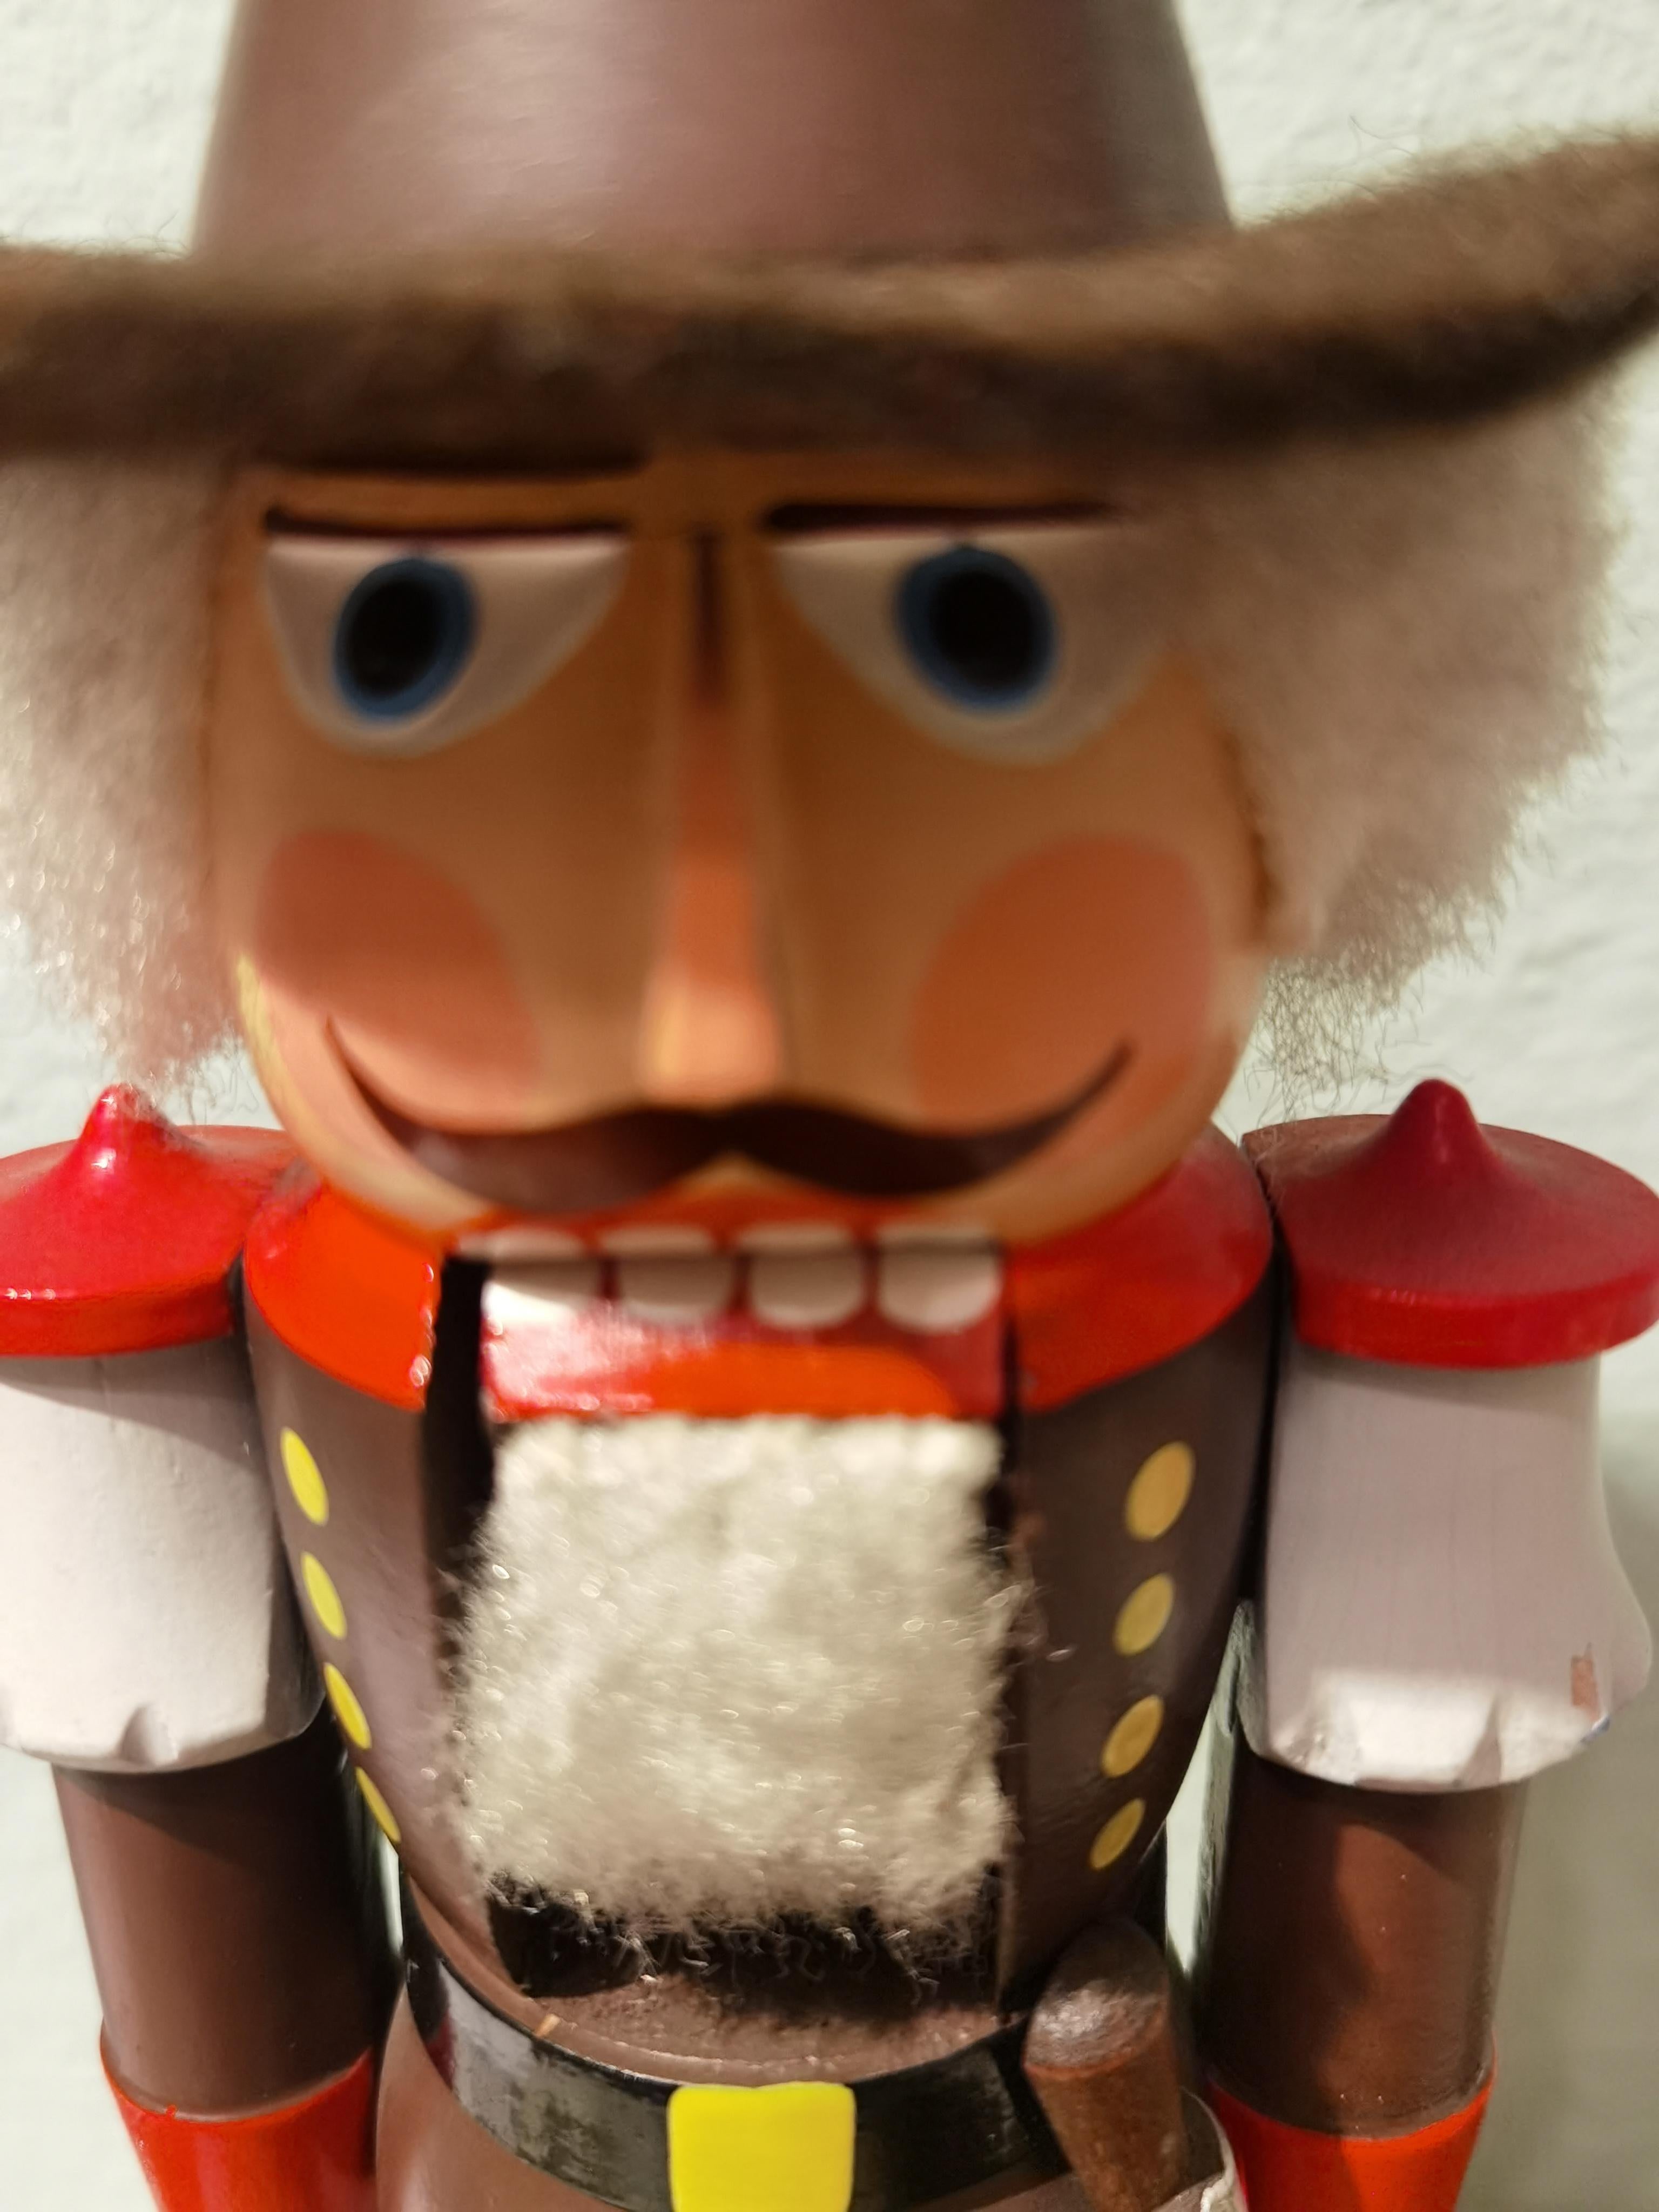 Wooden nutcracker Tiroler figure from the Erzgebirge. The region Erzgebirge formerly Eastern Germany is famous for this special kind of nutcrackers, where intricate carving has been their home. Completely hand-painted in brown and red colors and